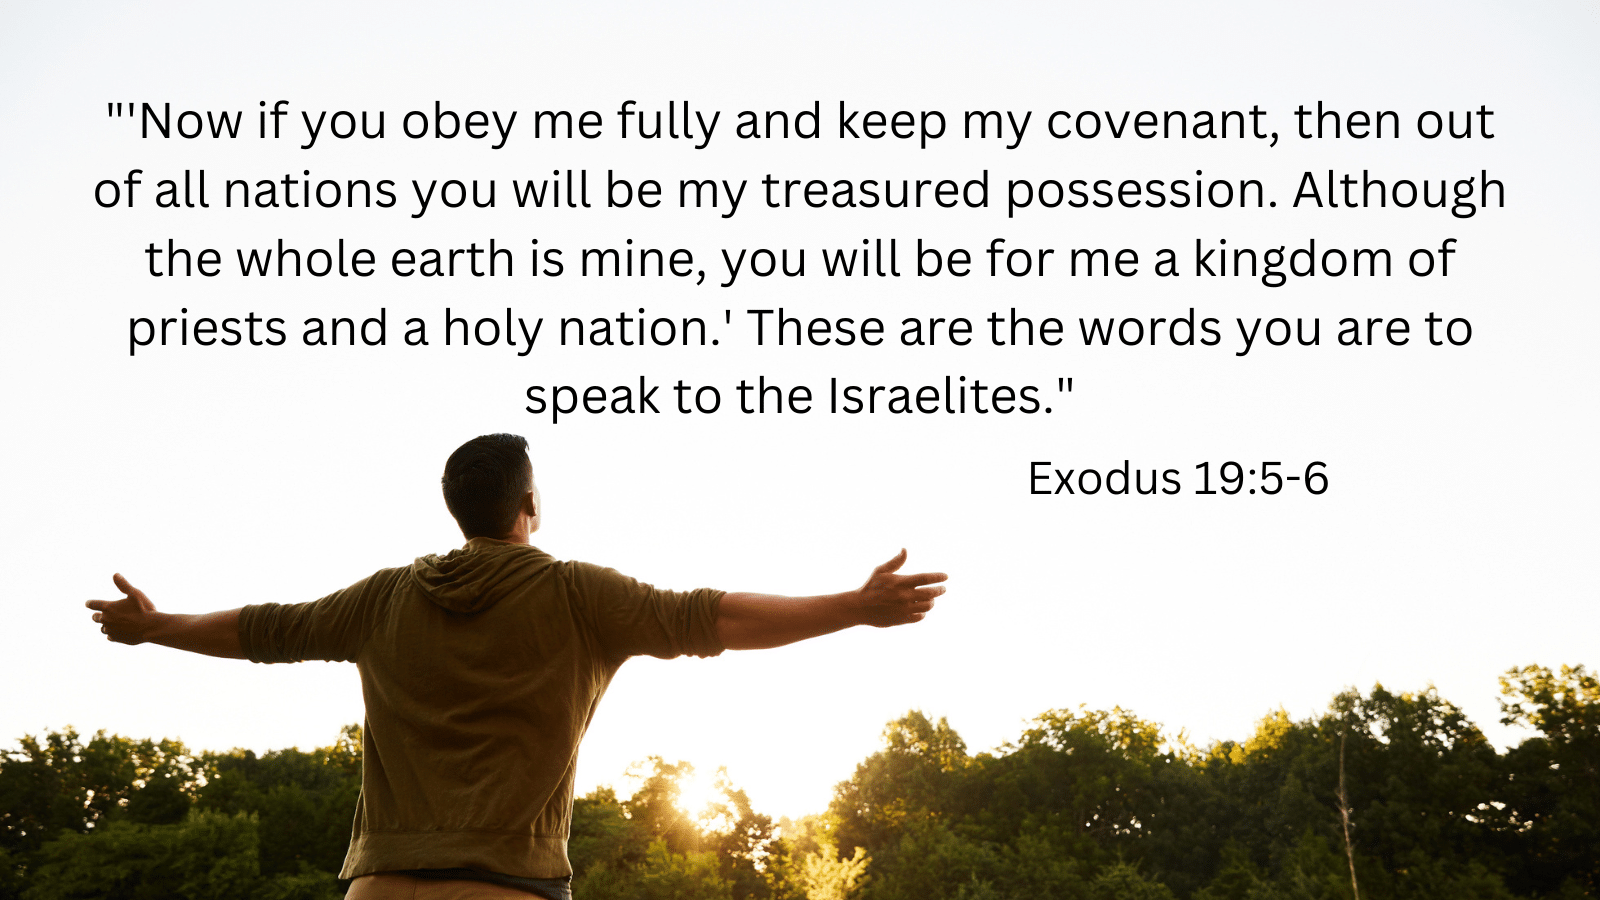 Man with open arms with Exodus 19:5-6